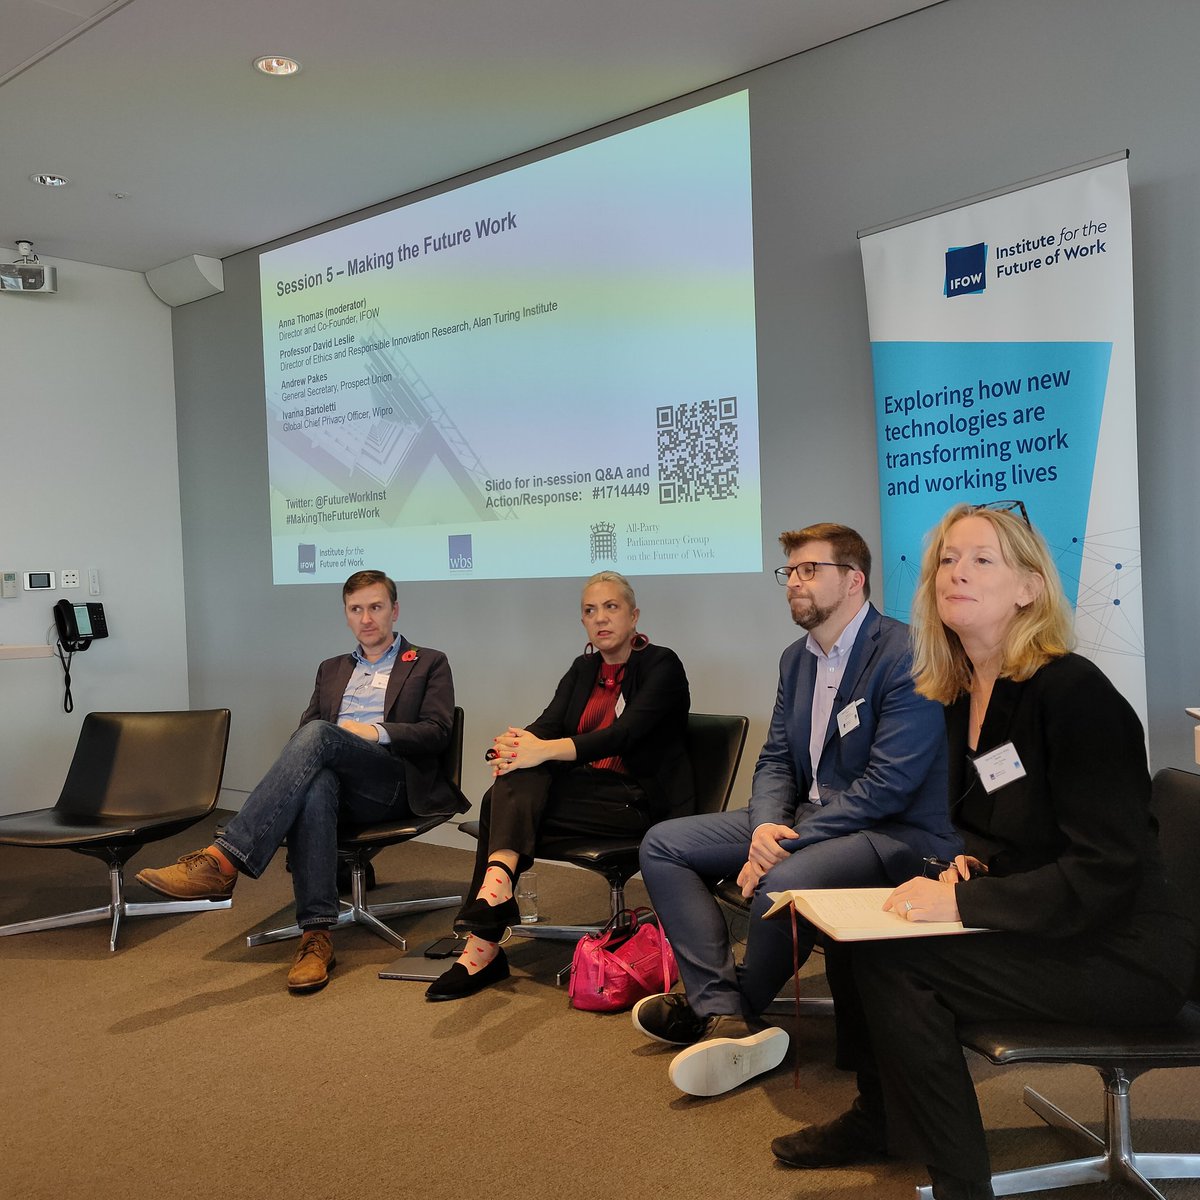 #Makingthefuturework Conference @FutureWorkInst @WarwickBSchool on closg plenary with @andrewpakes_ @ivannabartoletti Dr David Leslie @turinginst & Anna Thomas (Chair) on how #policies, #politics, #Governance #people & #institutions can build #Futures that #work for all. @CIPD